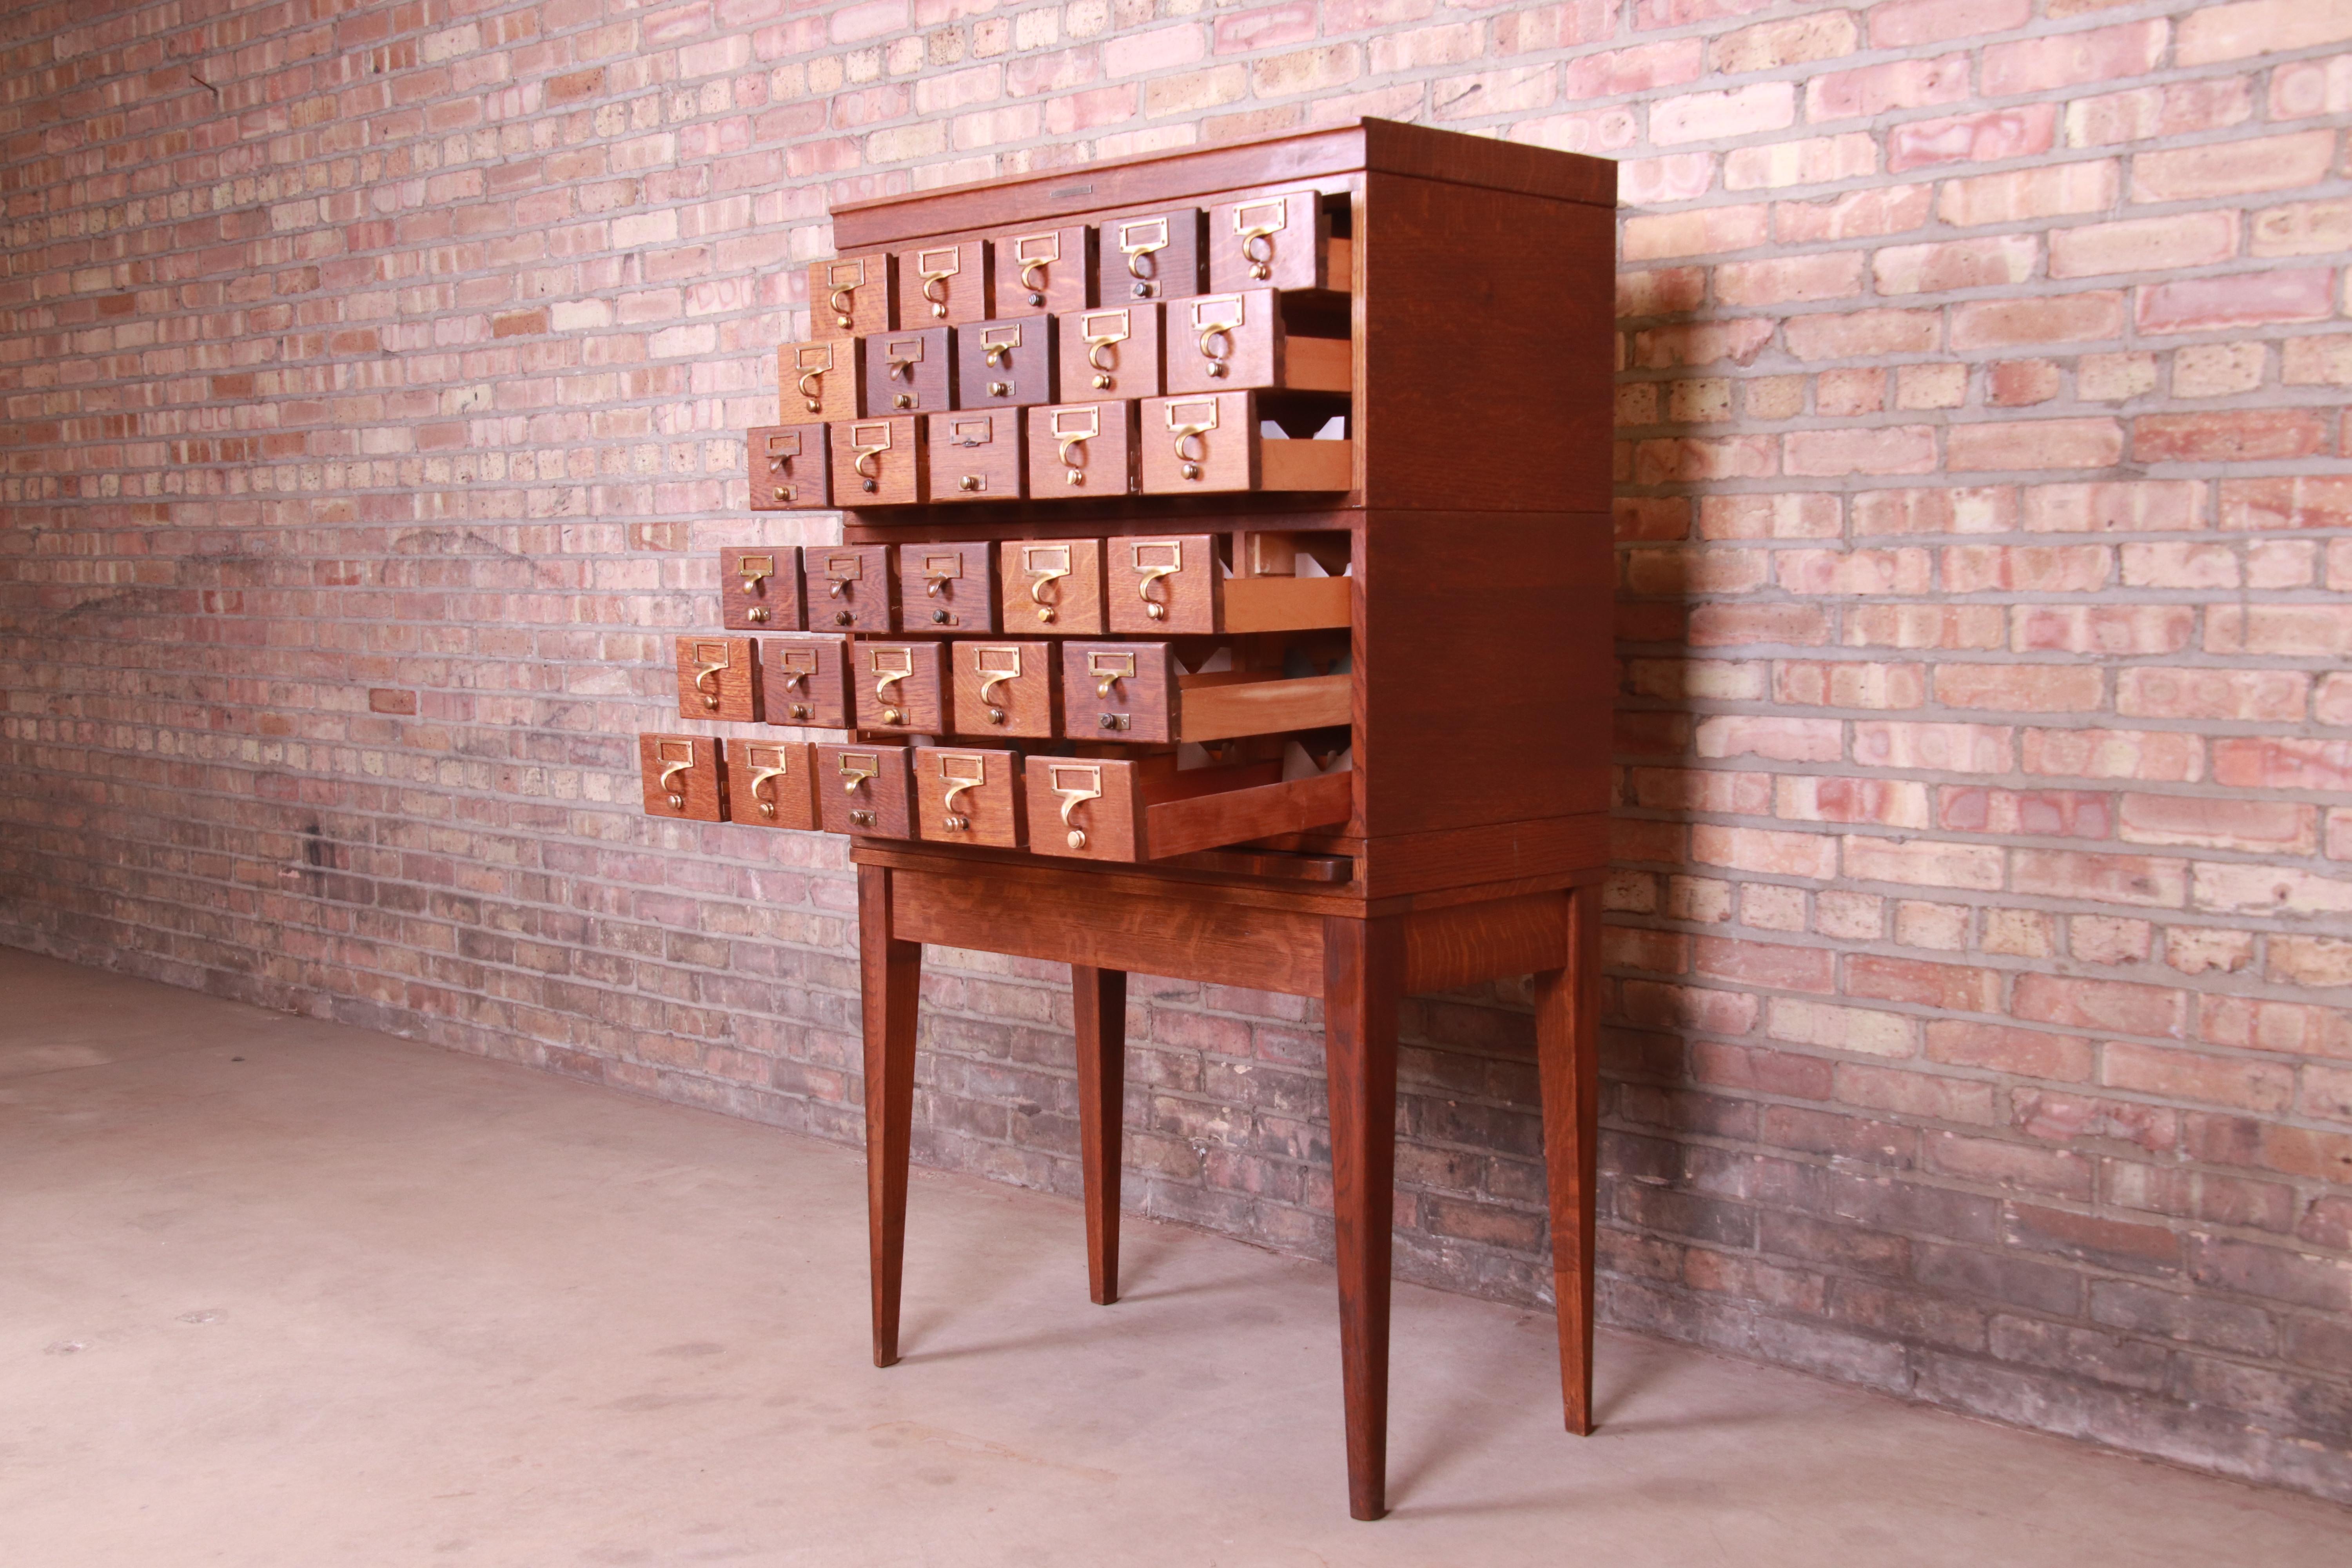 20th Century Mid-Century Modern 30-Drawer Oak Library Card Catalog by Gaylord Bros.